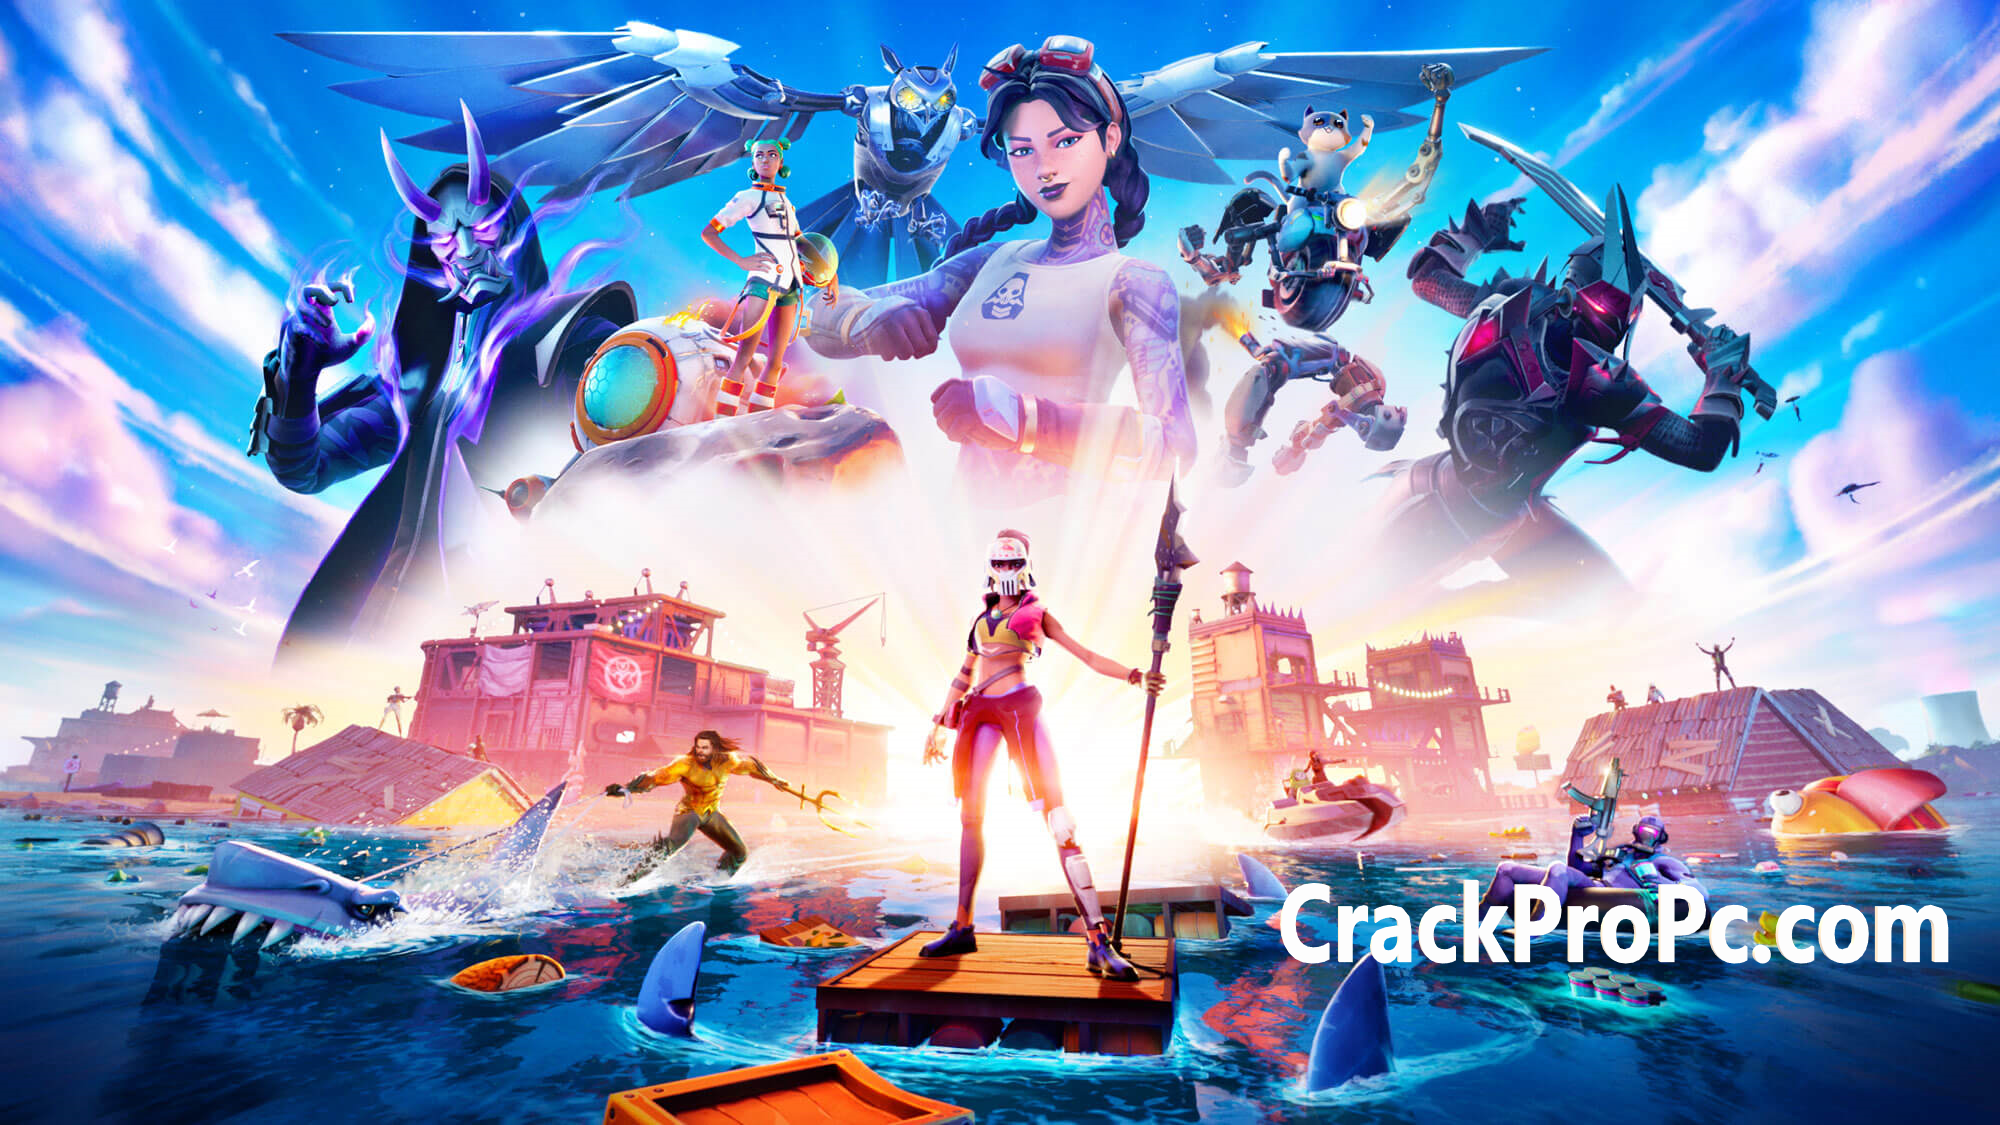 Fortnite 9.11.2 Crack Patch Download With License Key Full Version